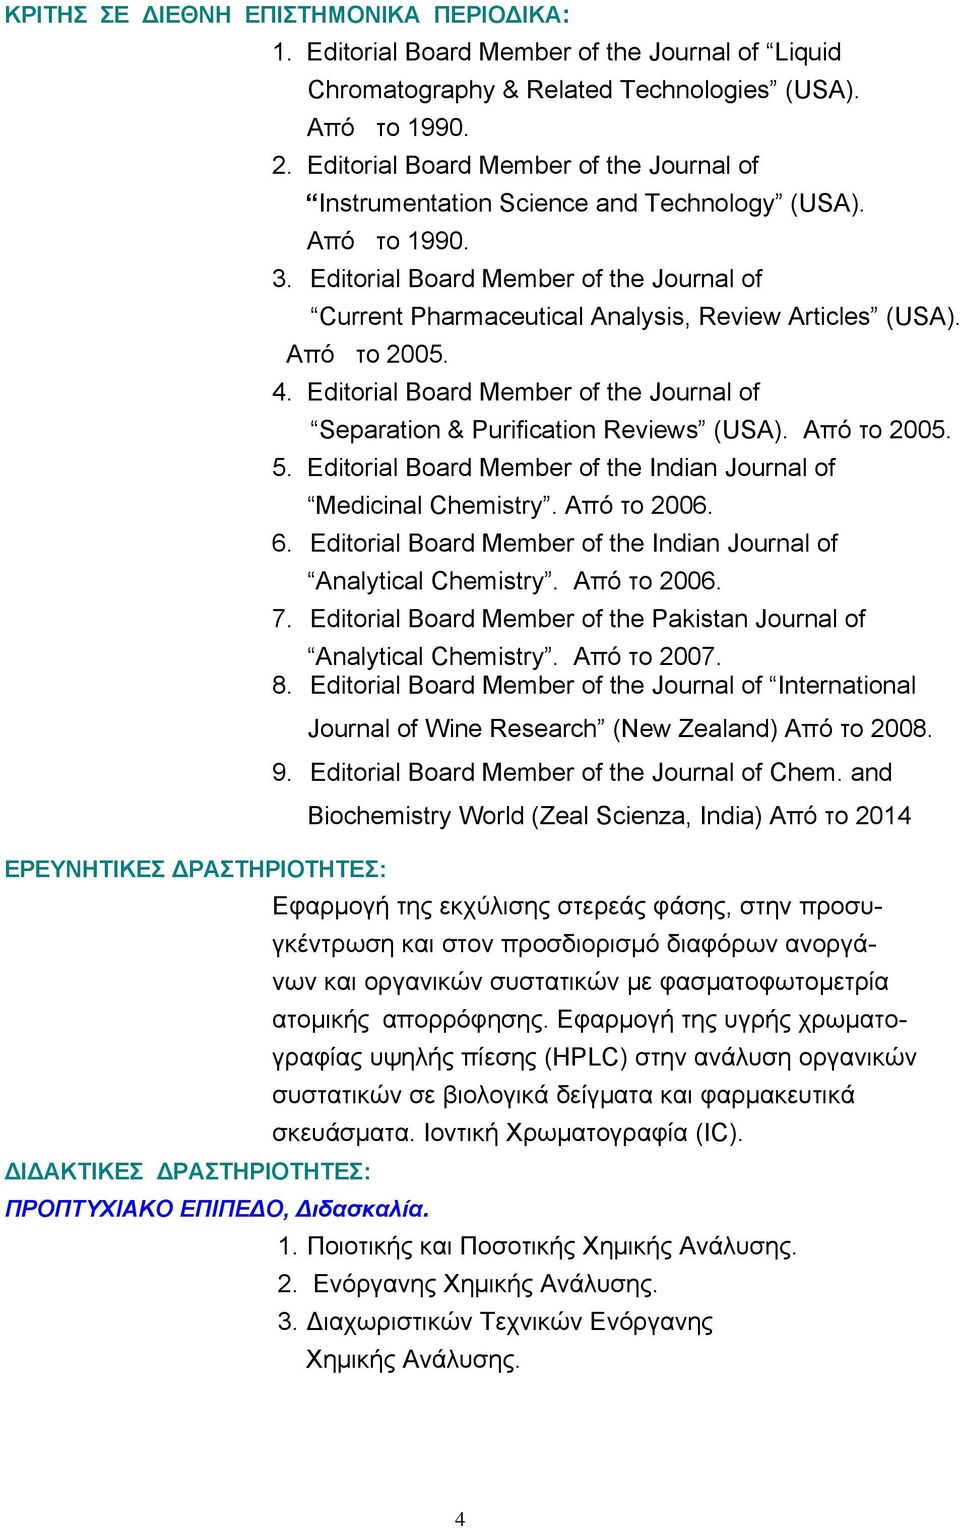 Editorial Board Member of the Journal of Current Pharmaceutical Analysis, Review Articles (USA). Από το 2005. 4. Editorial Board Member of the Journal of Separation & Purification Reviews (USA).